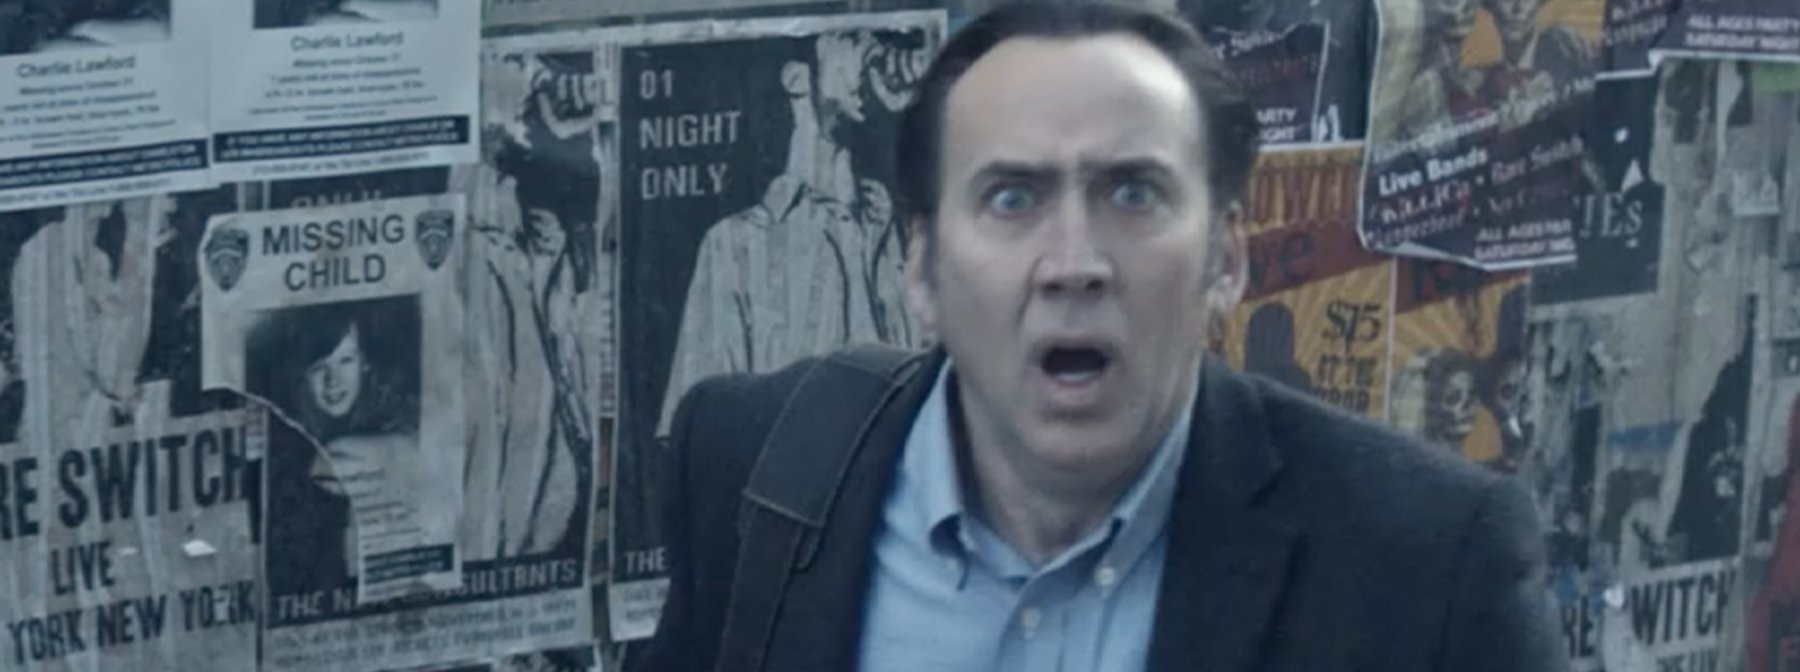 An ode to the mythological bad Nicolas Cage movie